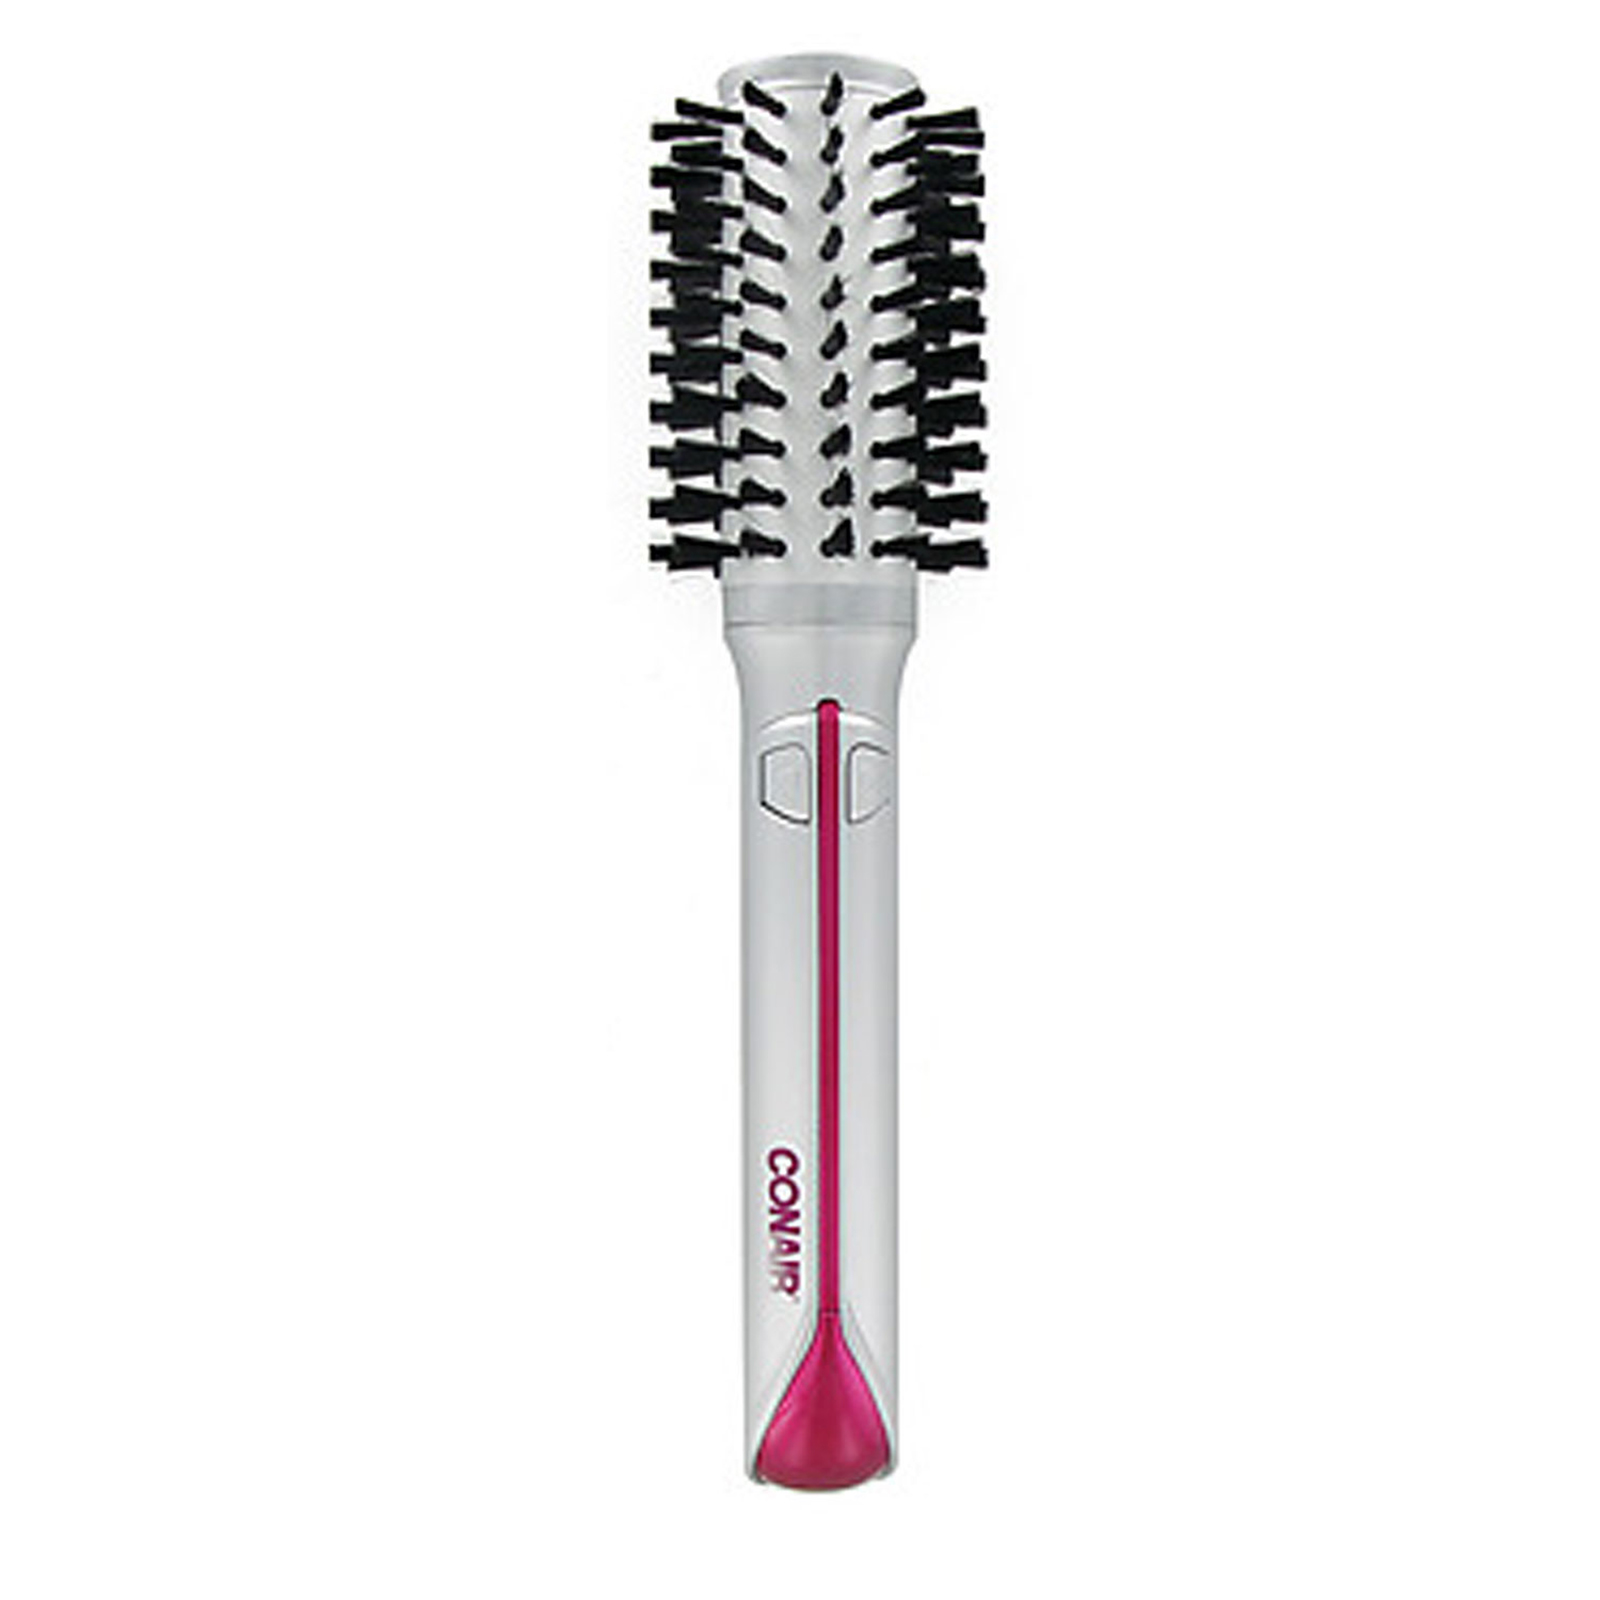 Scunci Effortless Beauty Double Combs, Upzing, Medium 1 comb   Beauty   Hair Care   Brushes & Combs